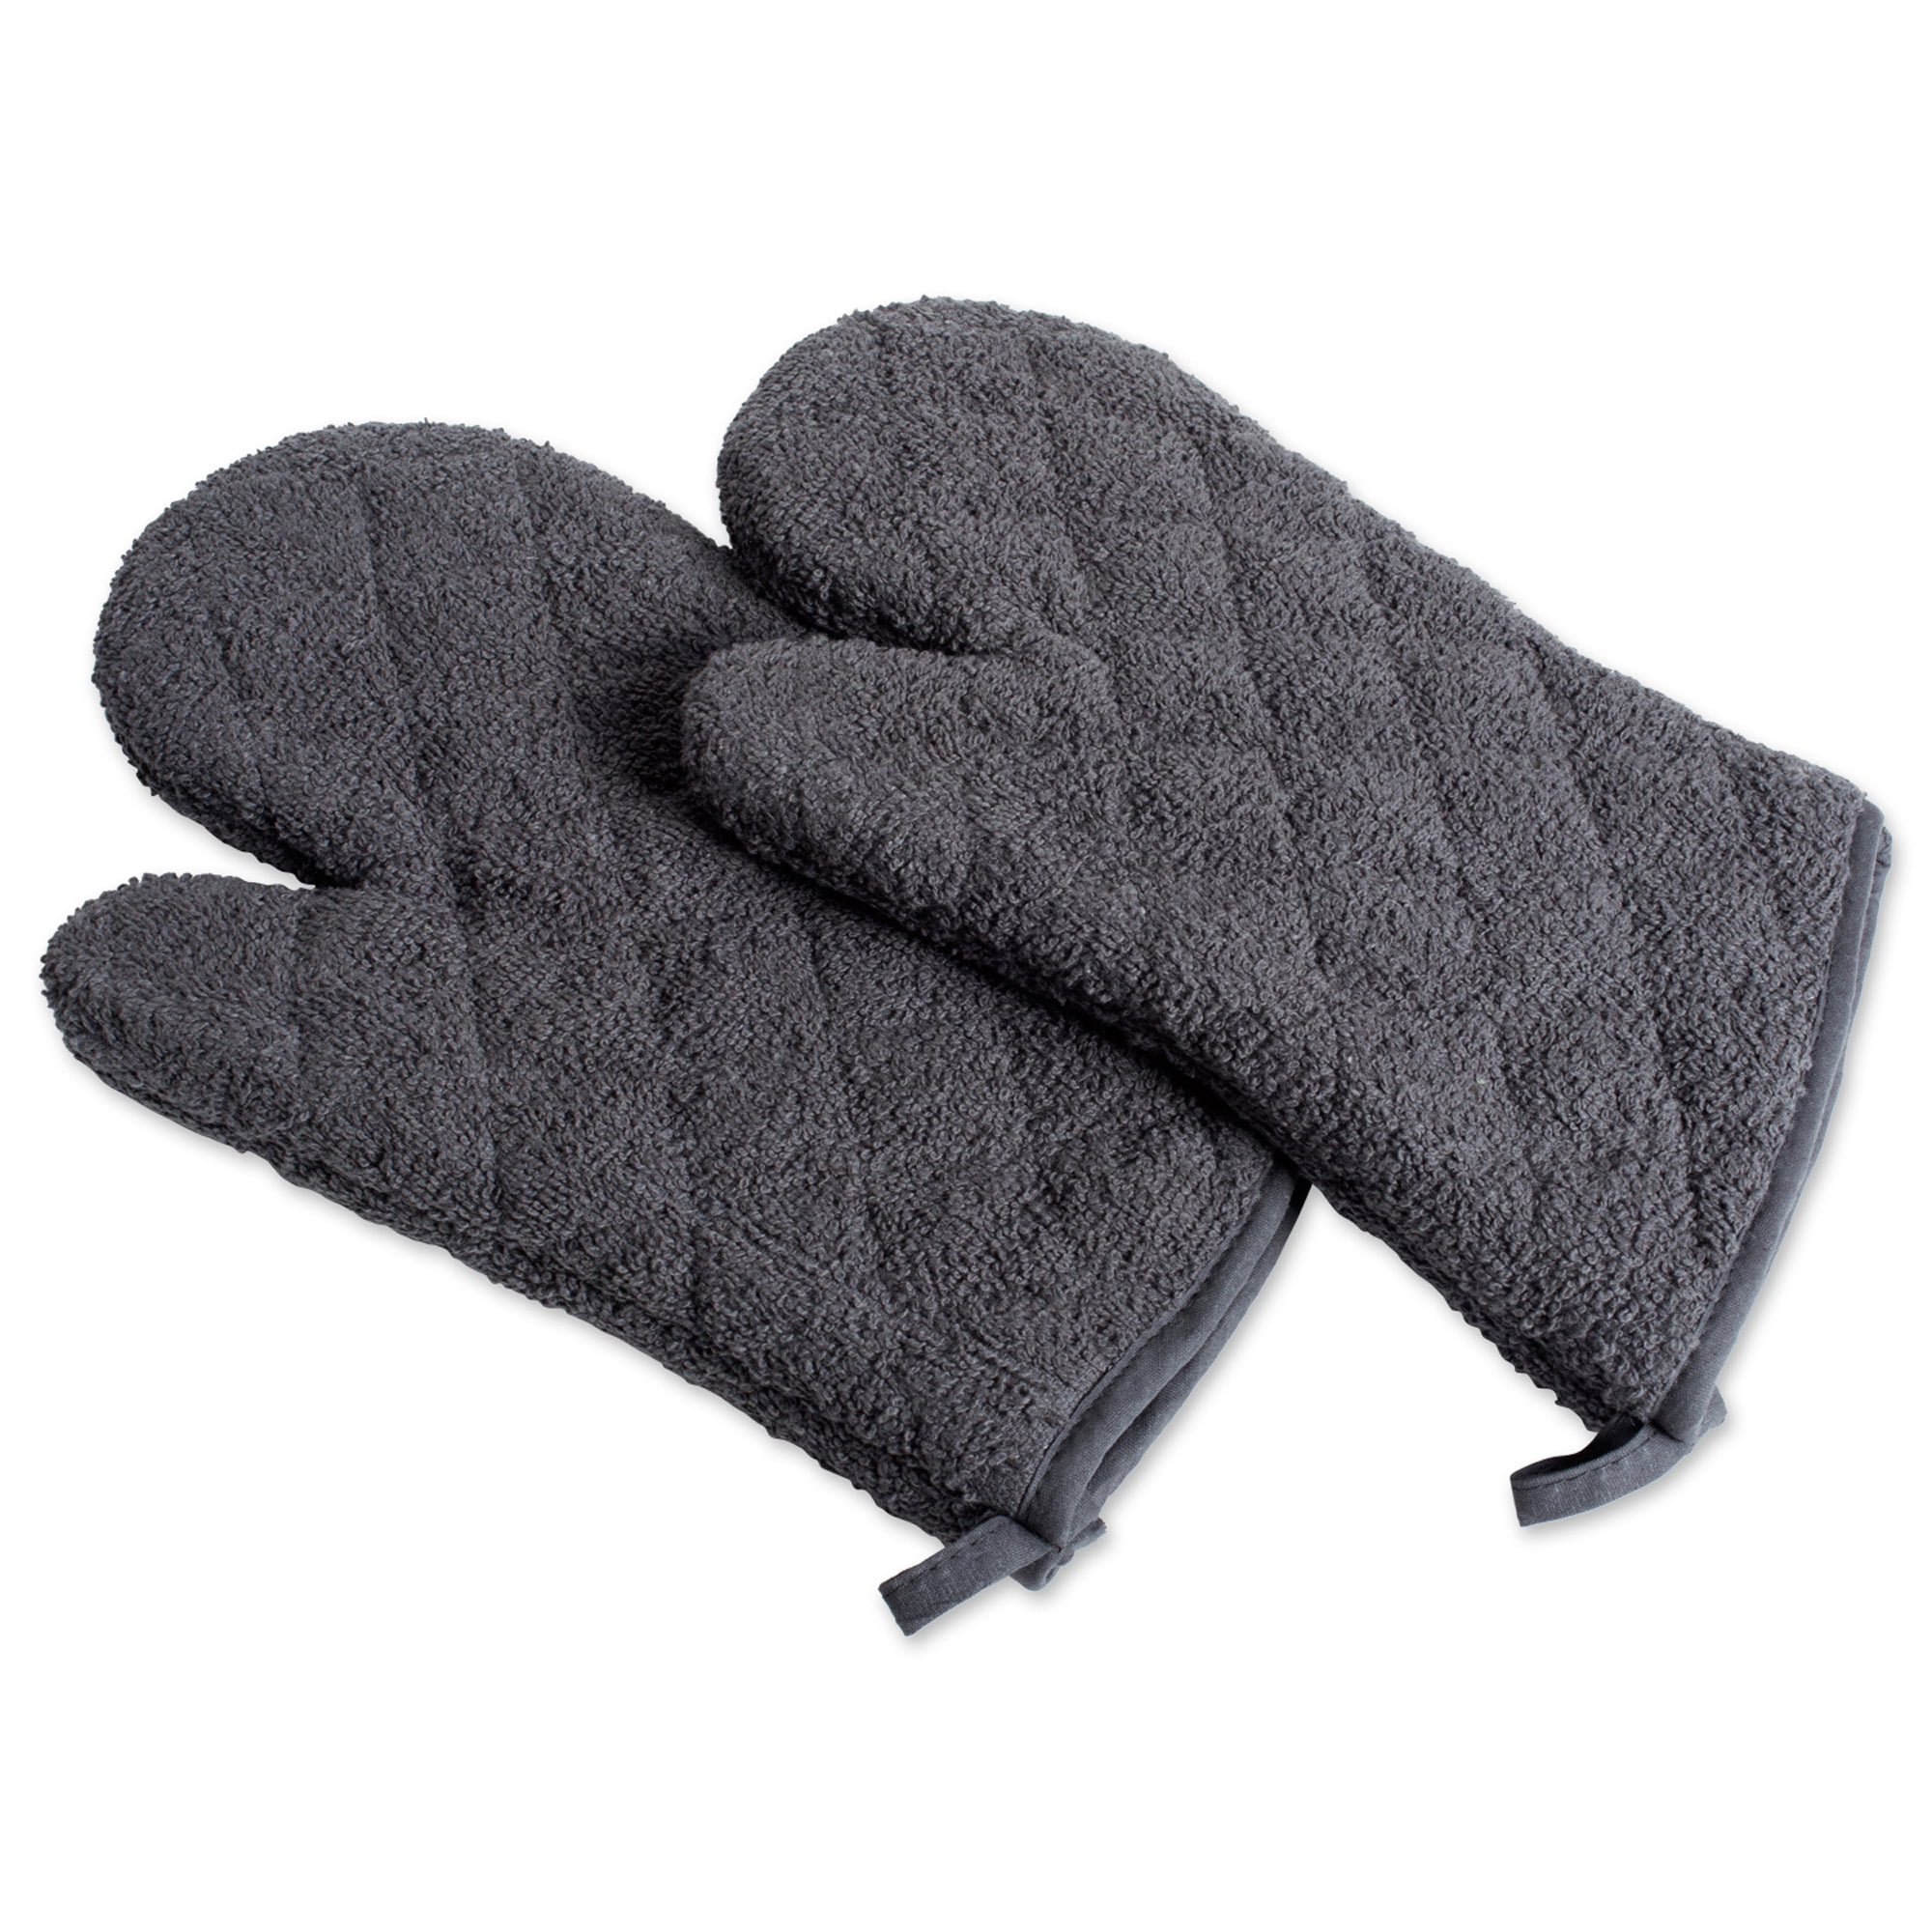 DII French Blue Terry Oven Mitt (Set of 2), 7x13, 100% Cotton 